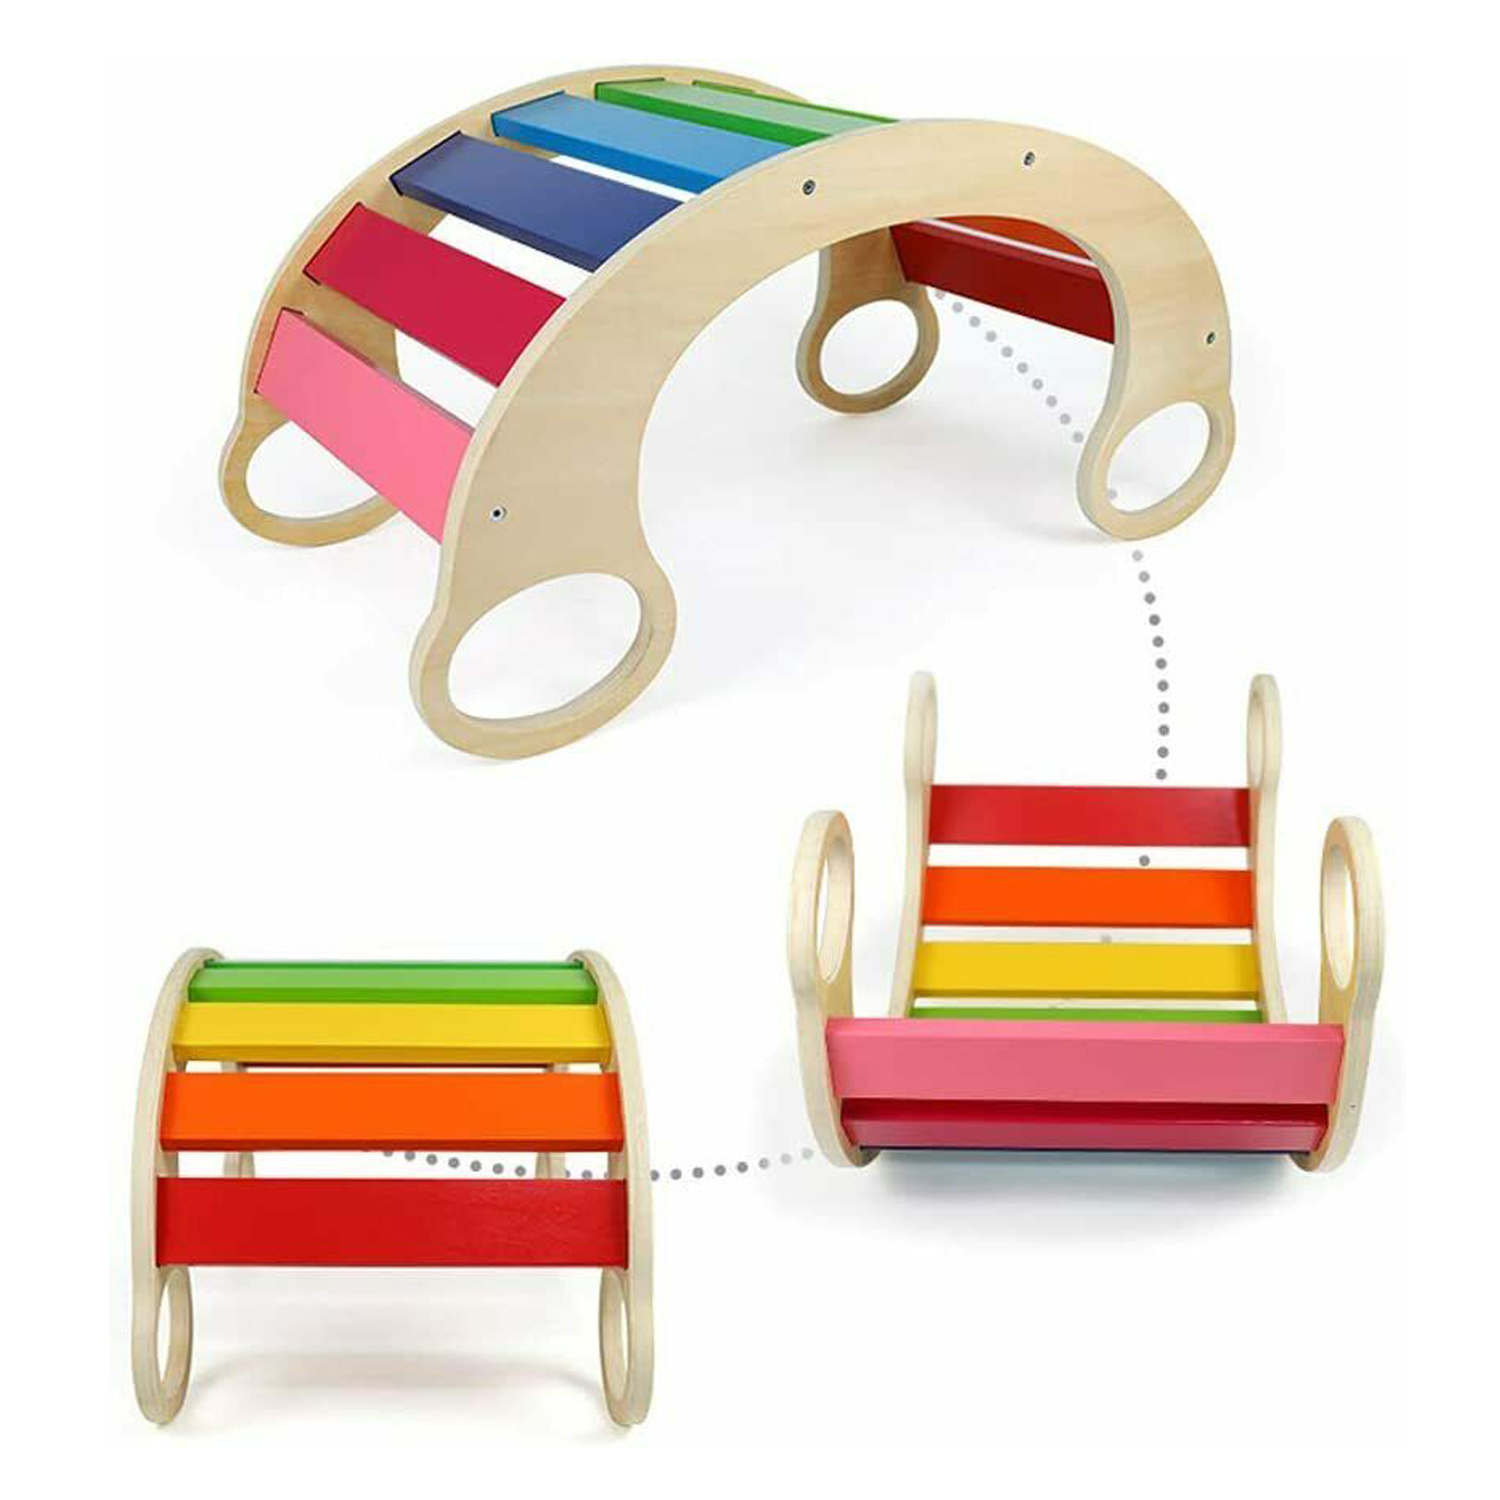 XIHAToy Childrens Rainbow Rocking Chair Pikler Triangle Rocker Seesaw Indoor Climbing Toys Seats for Baby